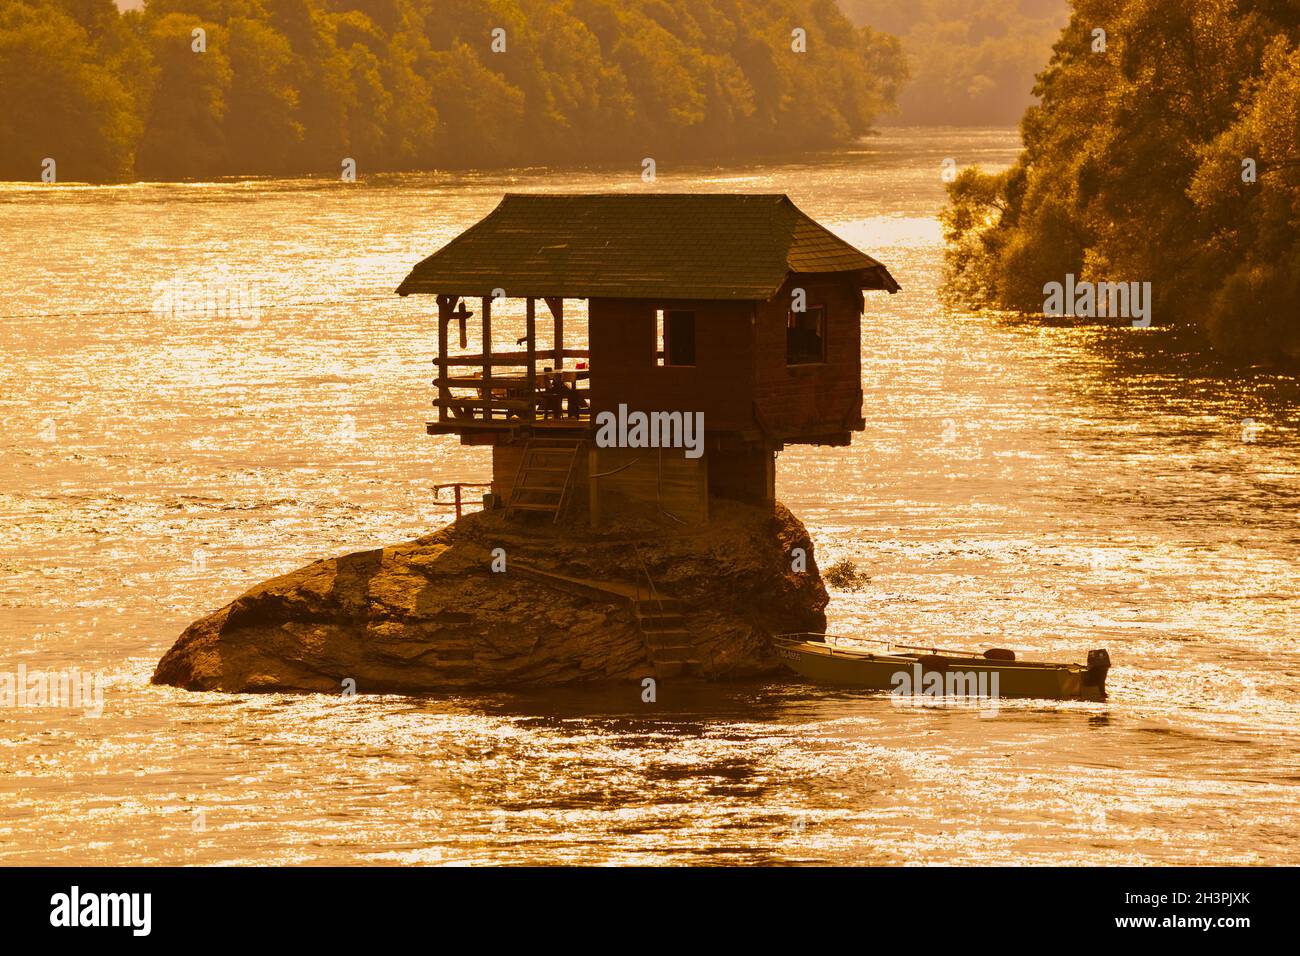 House on rock island in river Drina - Serbia Stock Photo